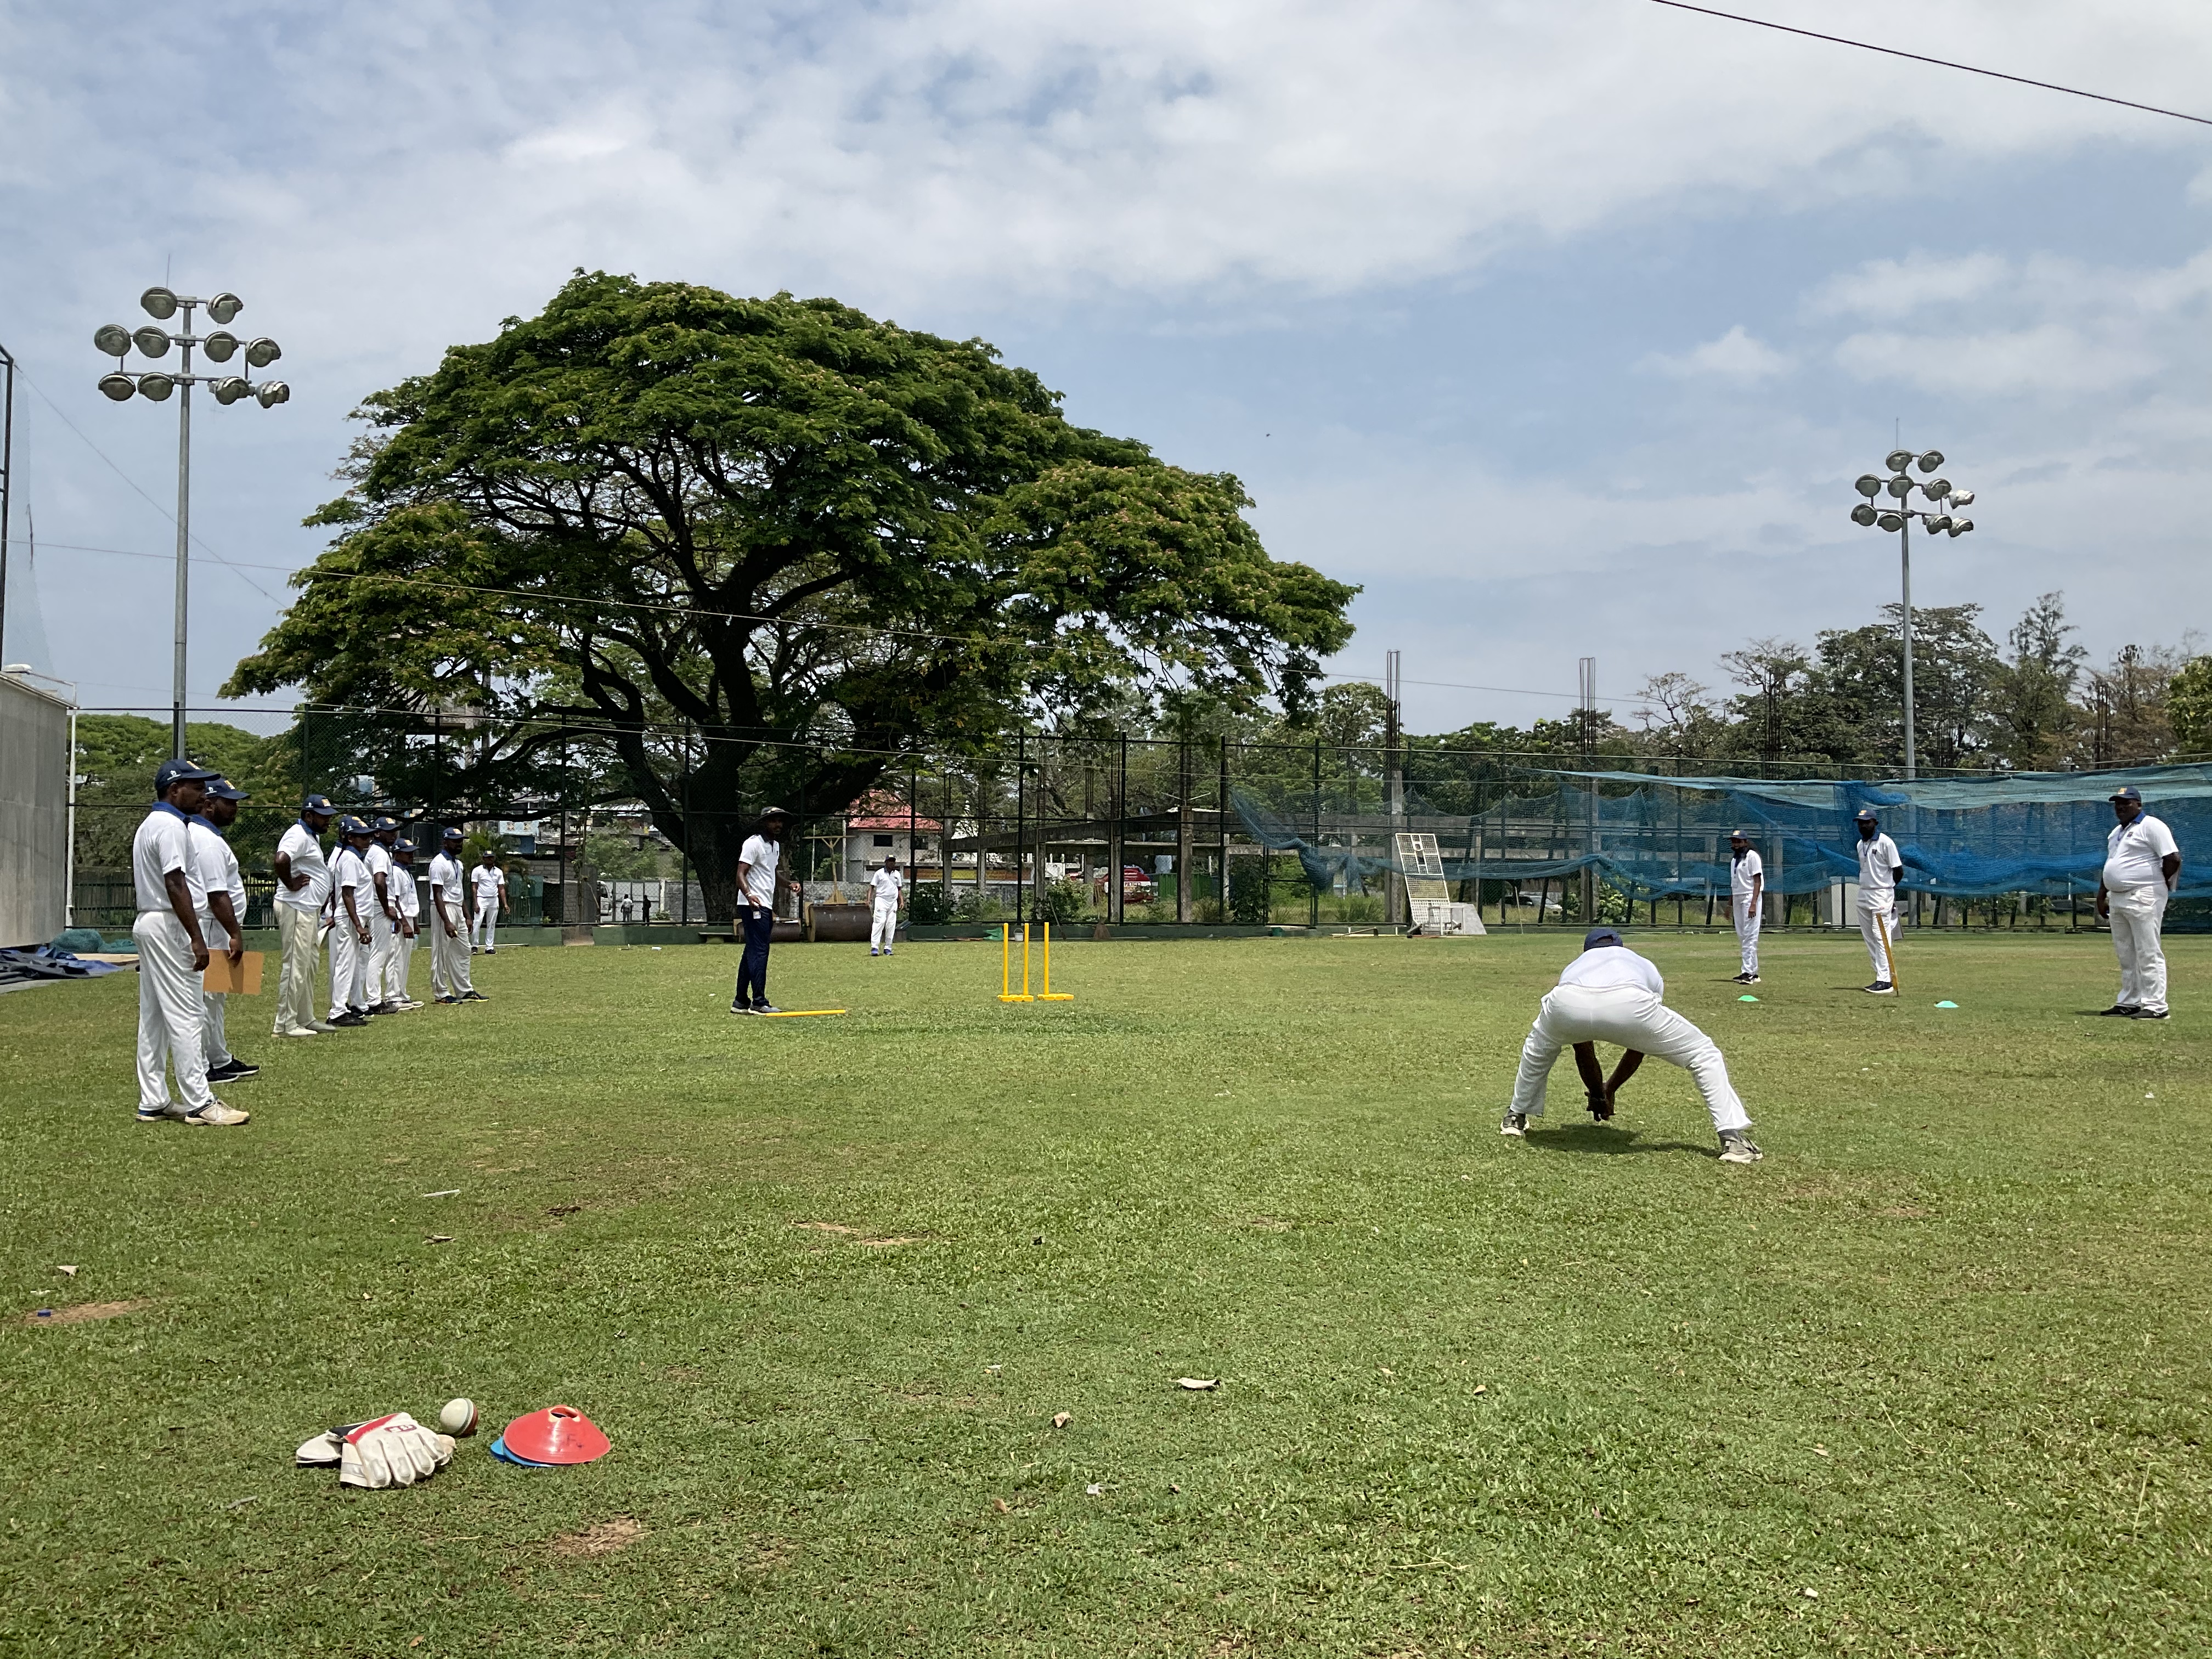 Day 3 of Western Province Level 1 Coaching Course Commenced at R Premadasa International Cricket Stadium